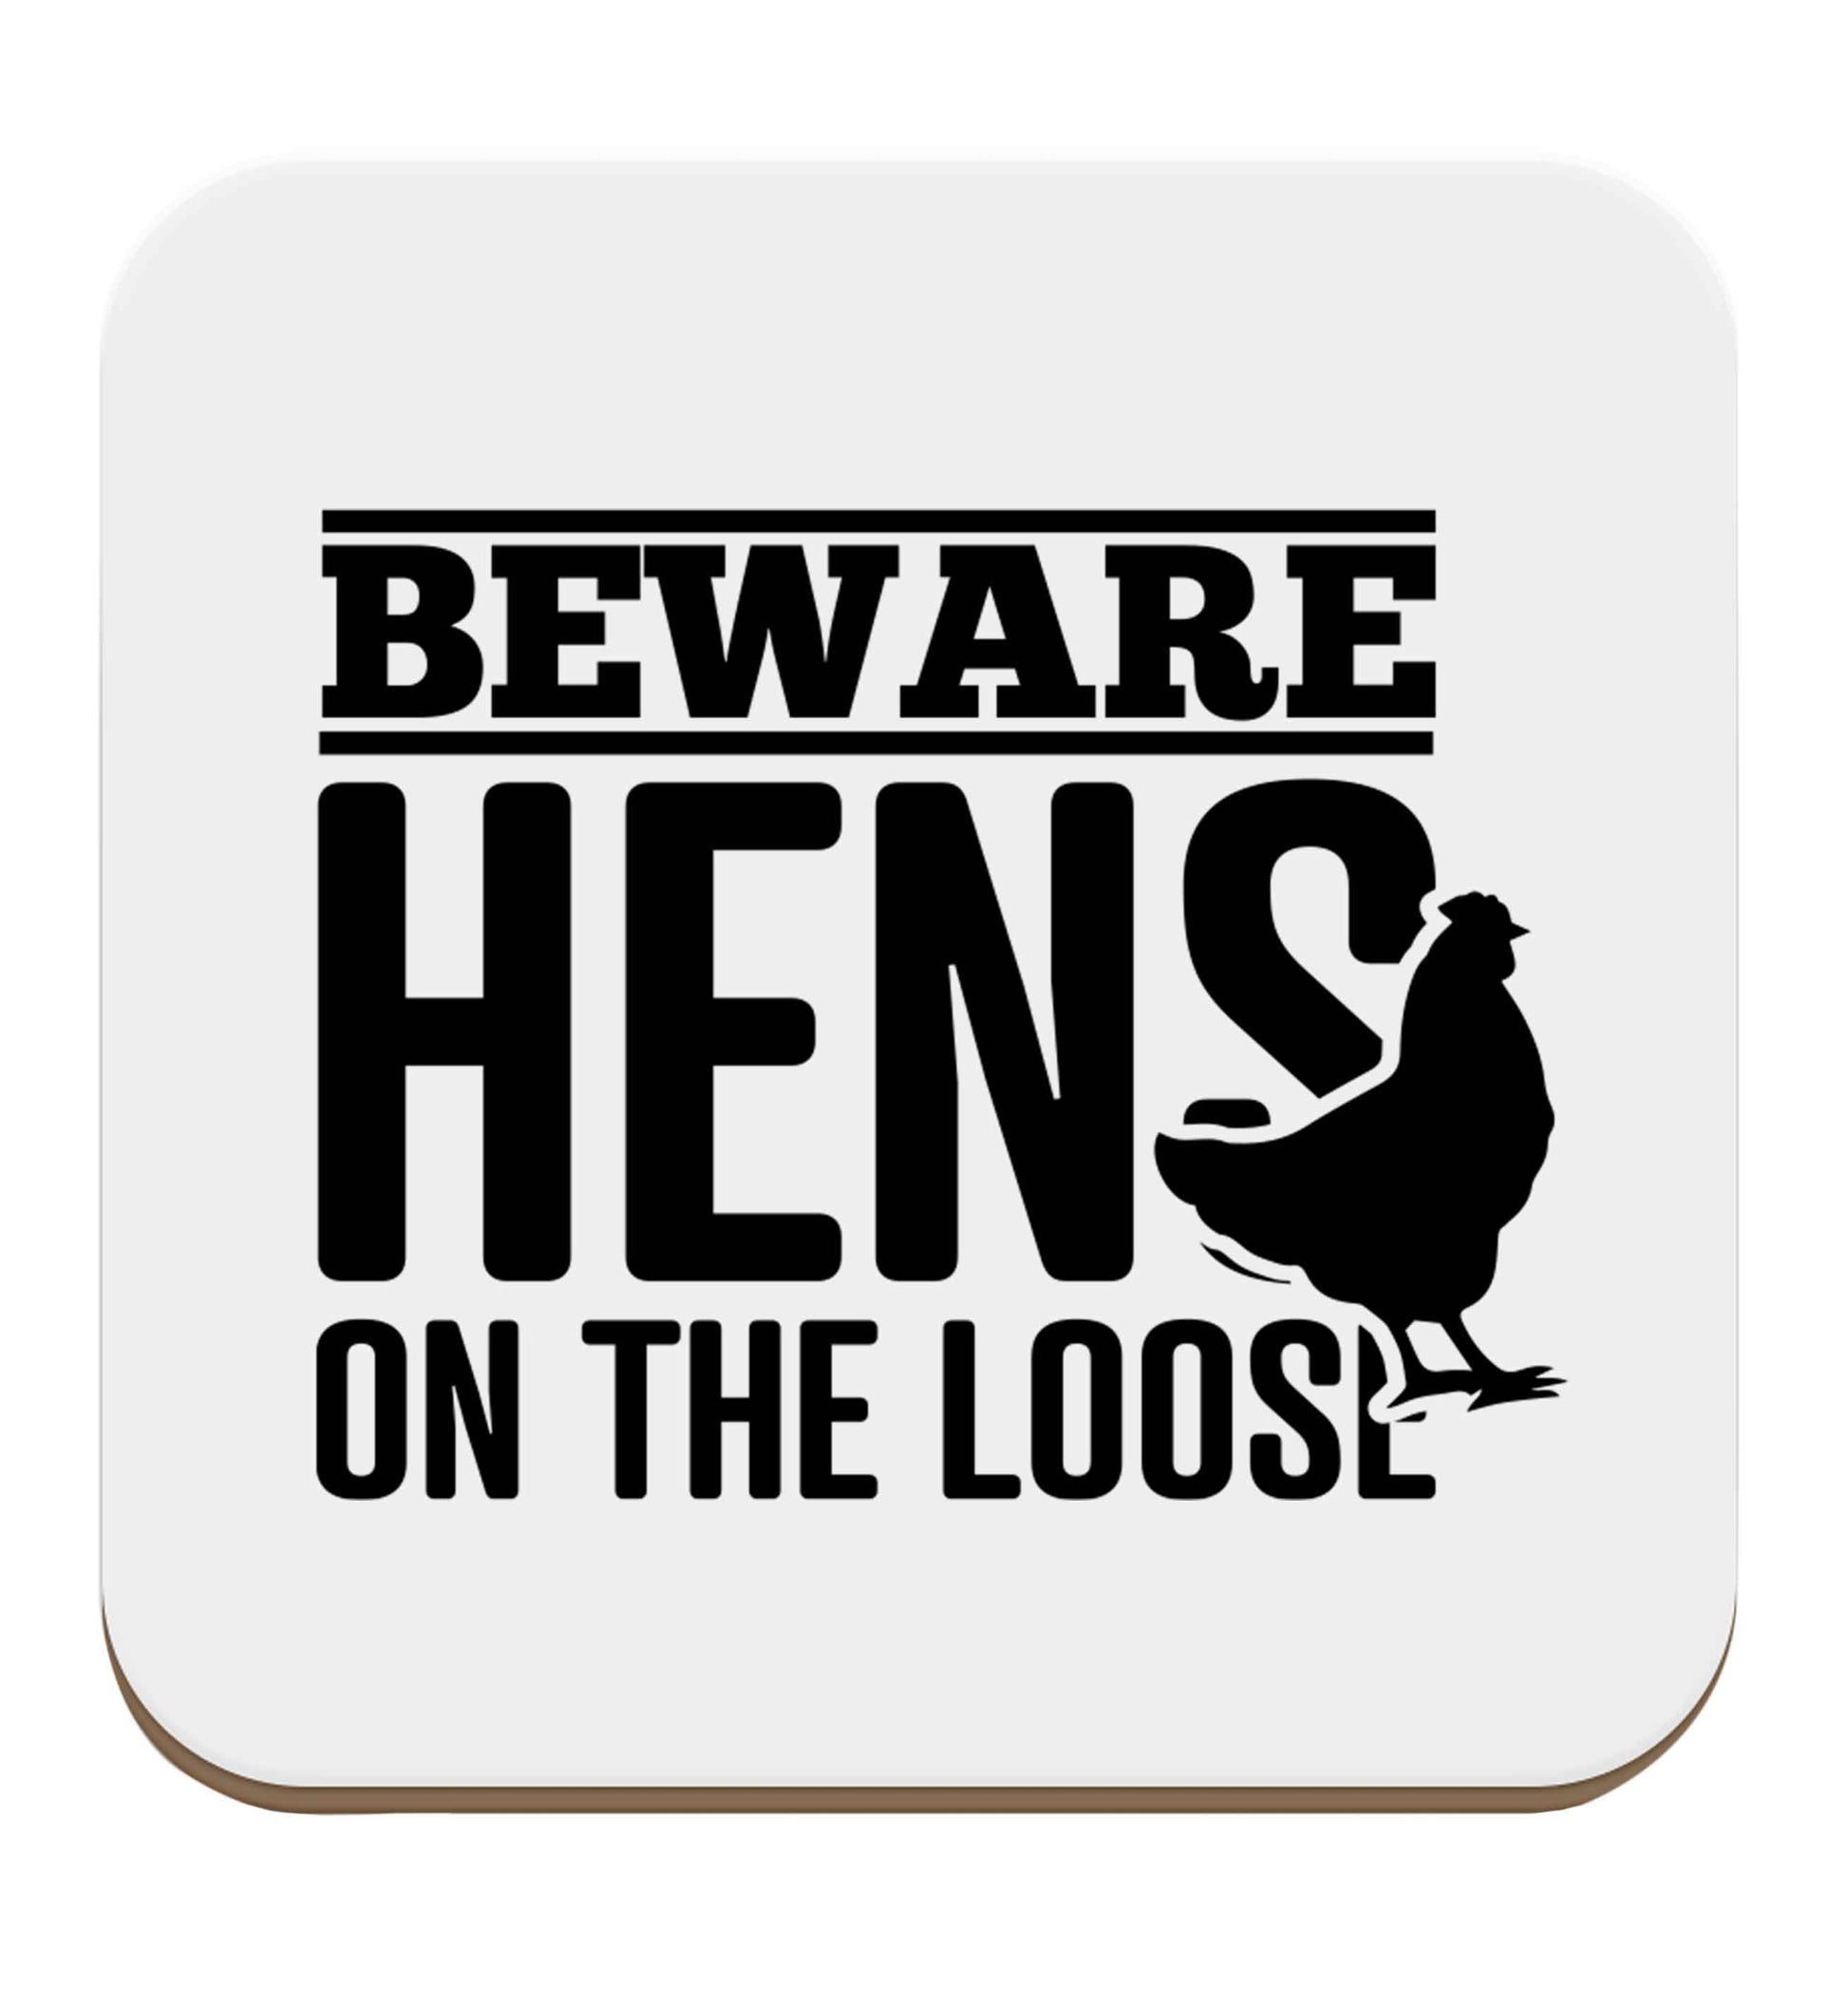 Beware hens on the loose set of four coasters